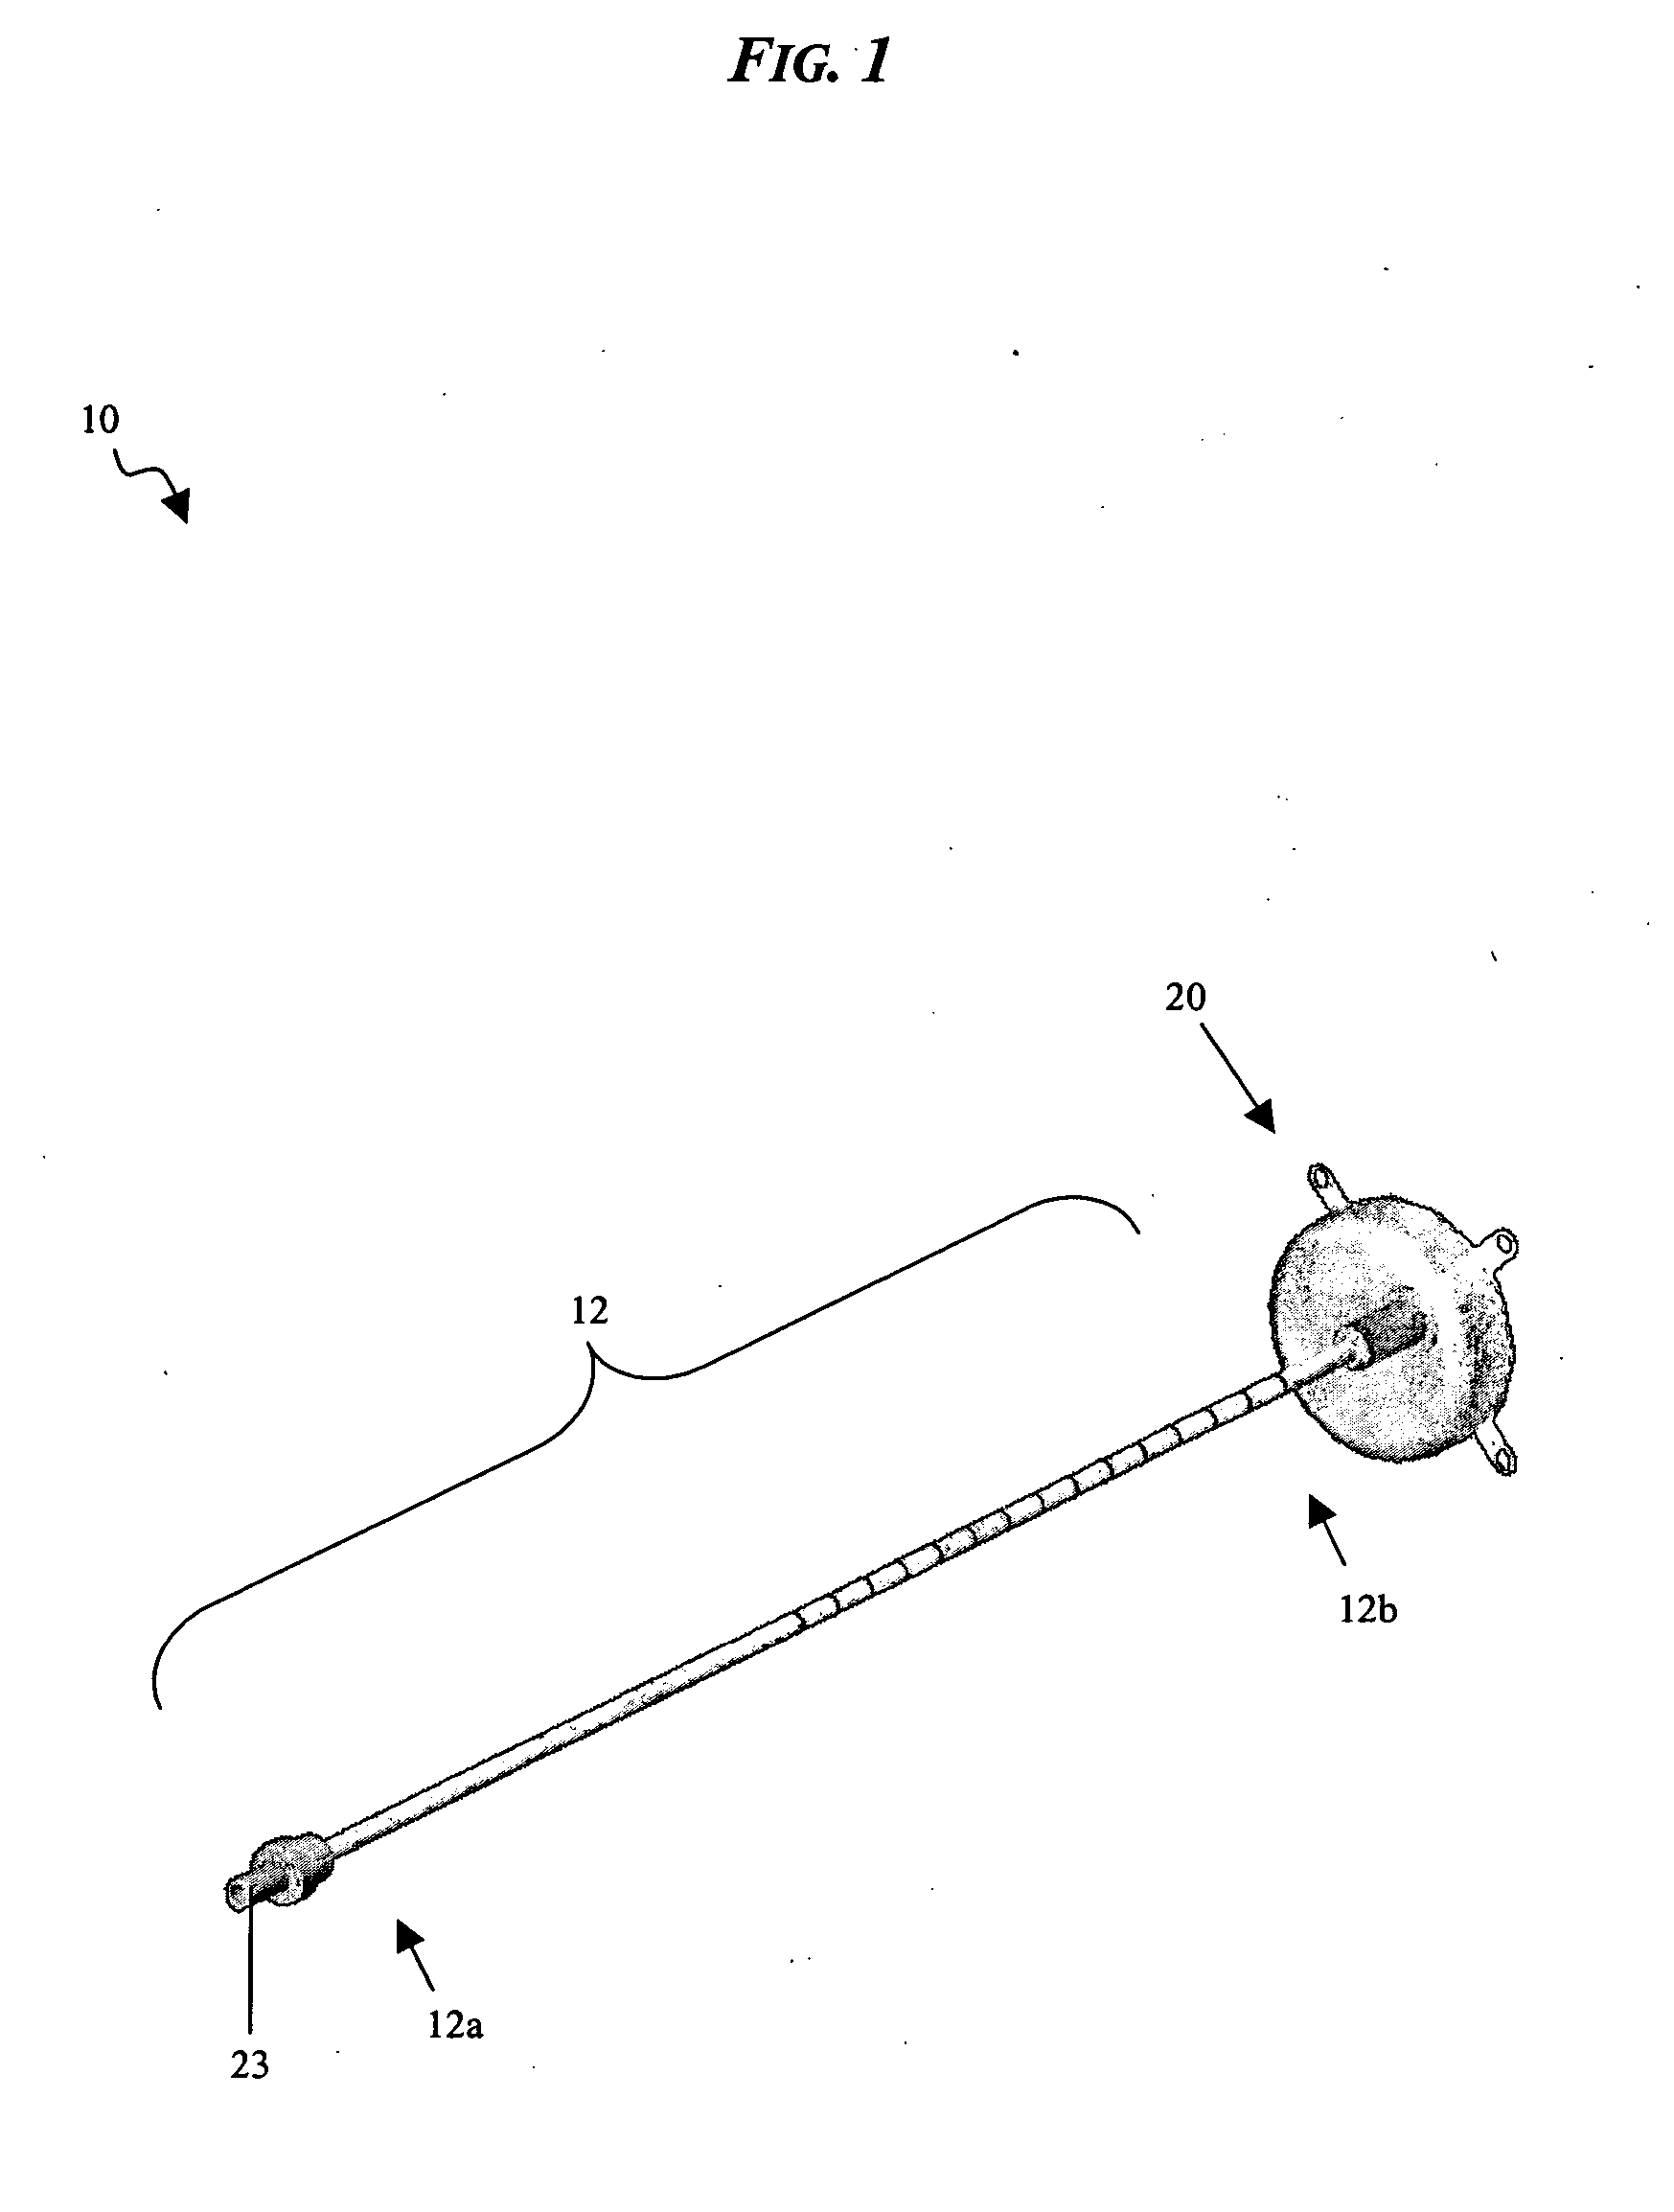 Brachytherapy apparatus and method for treating a target tissue through an external surface of the tissue